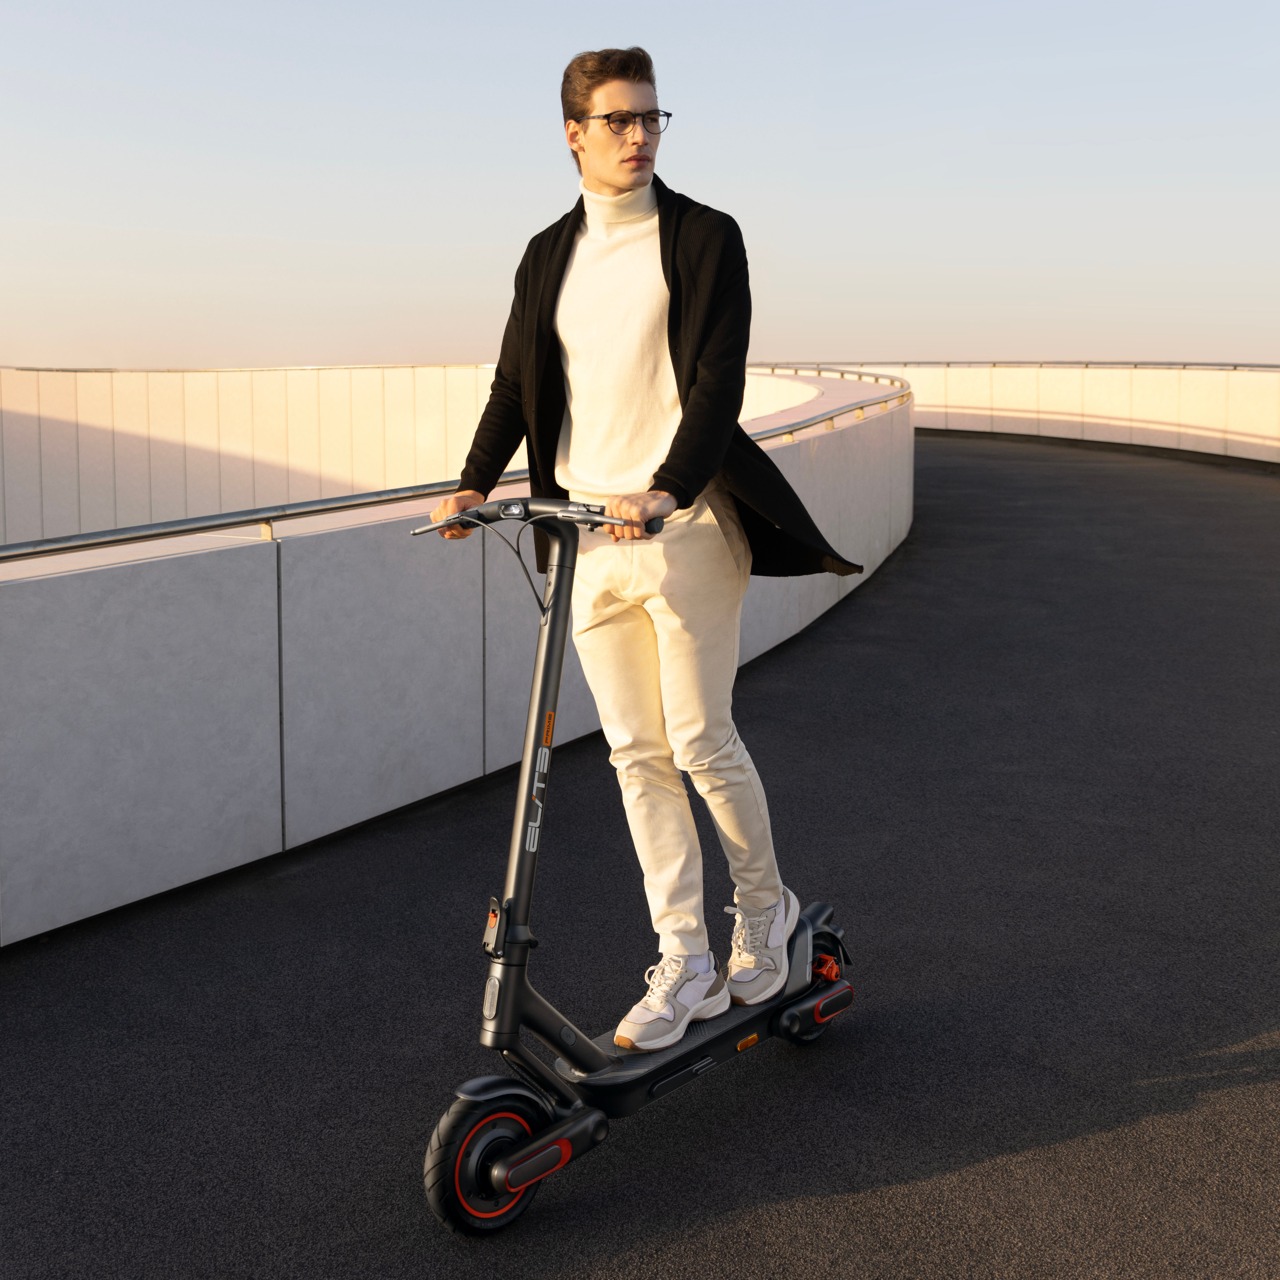 https://www.yankodesign.com/images/design_news/2023/04/this-foldable-e-scooter-comes-with-a-max-range-of-37-miles-making-it-perfect-for-urban-commutes/this_foldable_e-scooter_is_perfect_for_urban_commutes_10.jpg